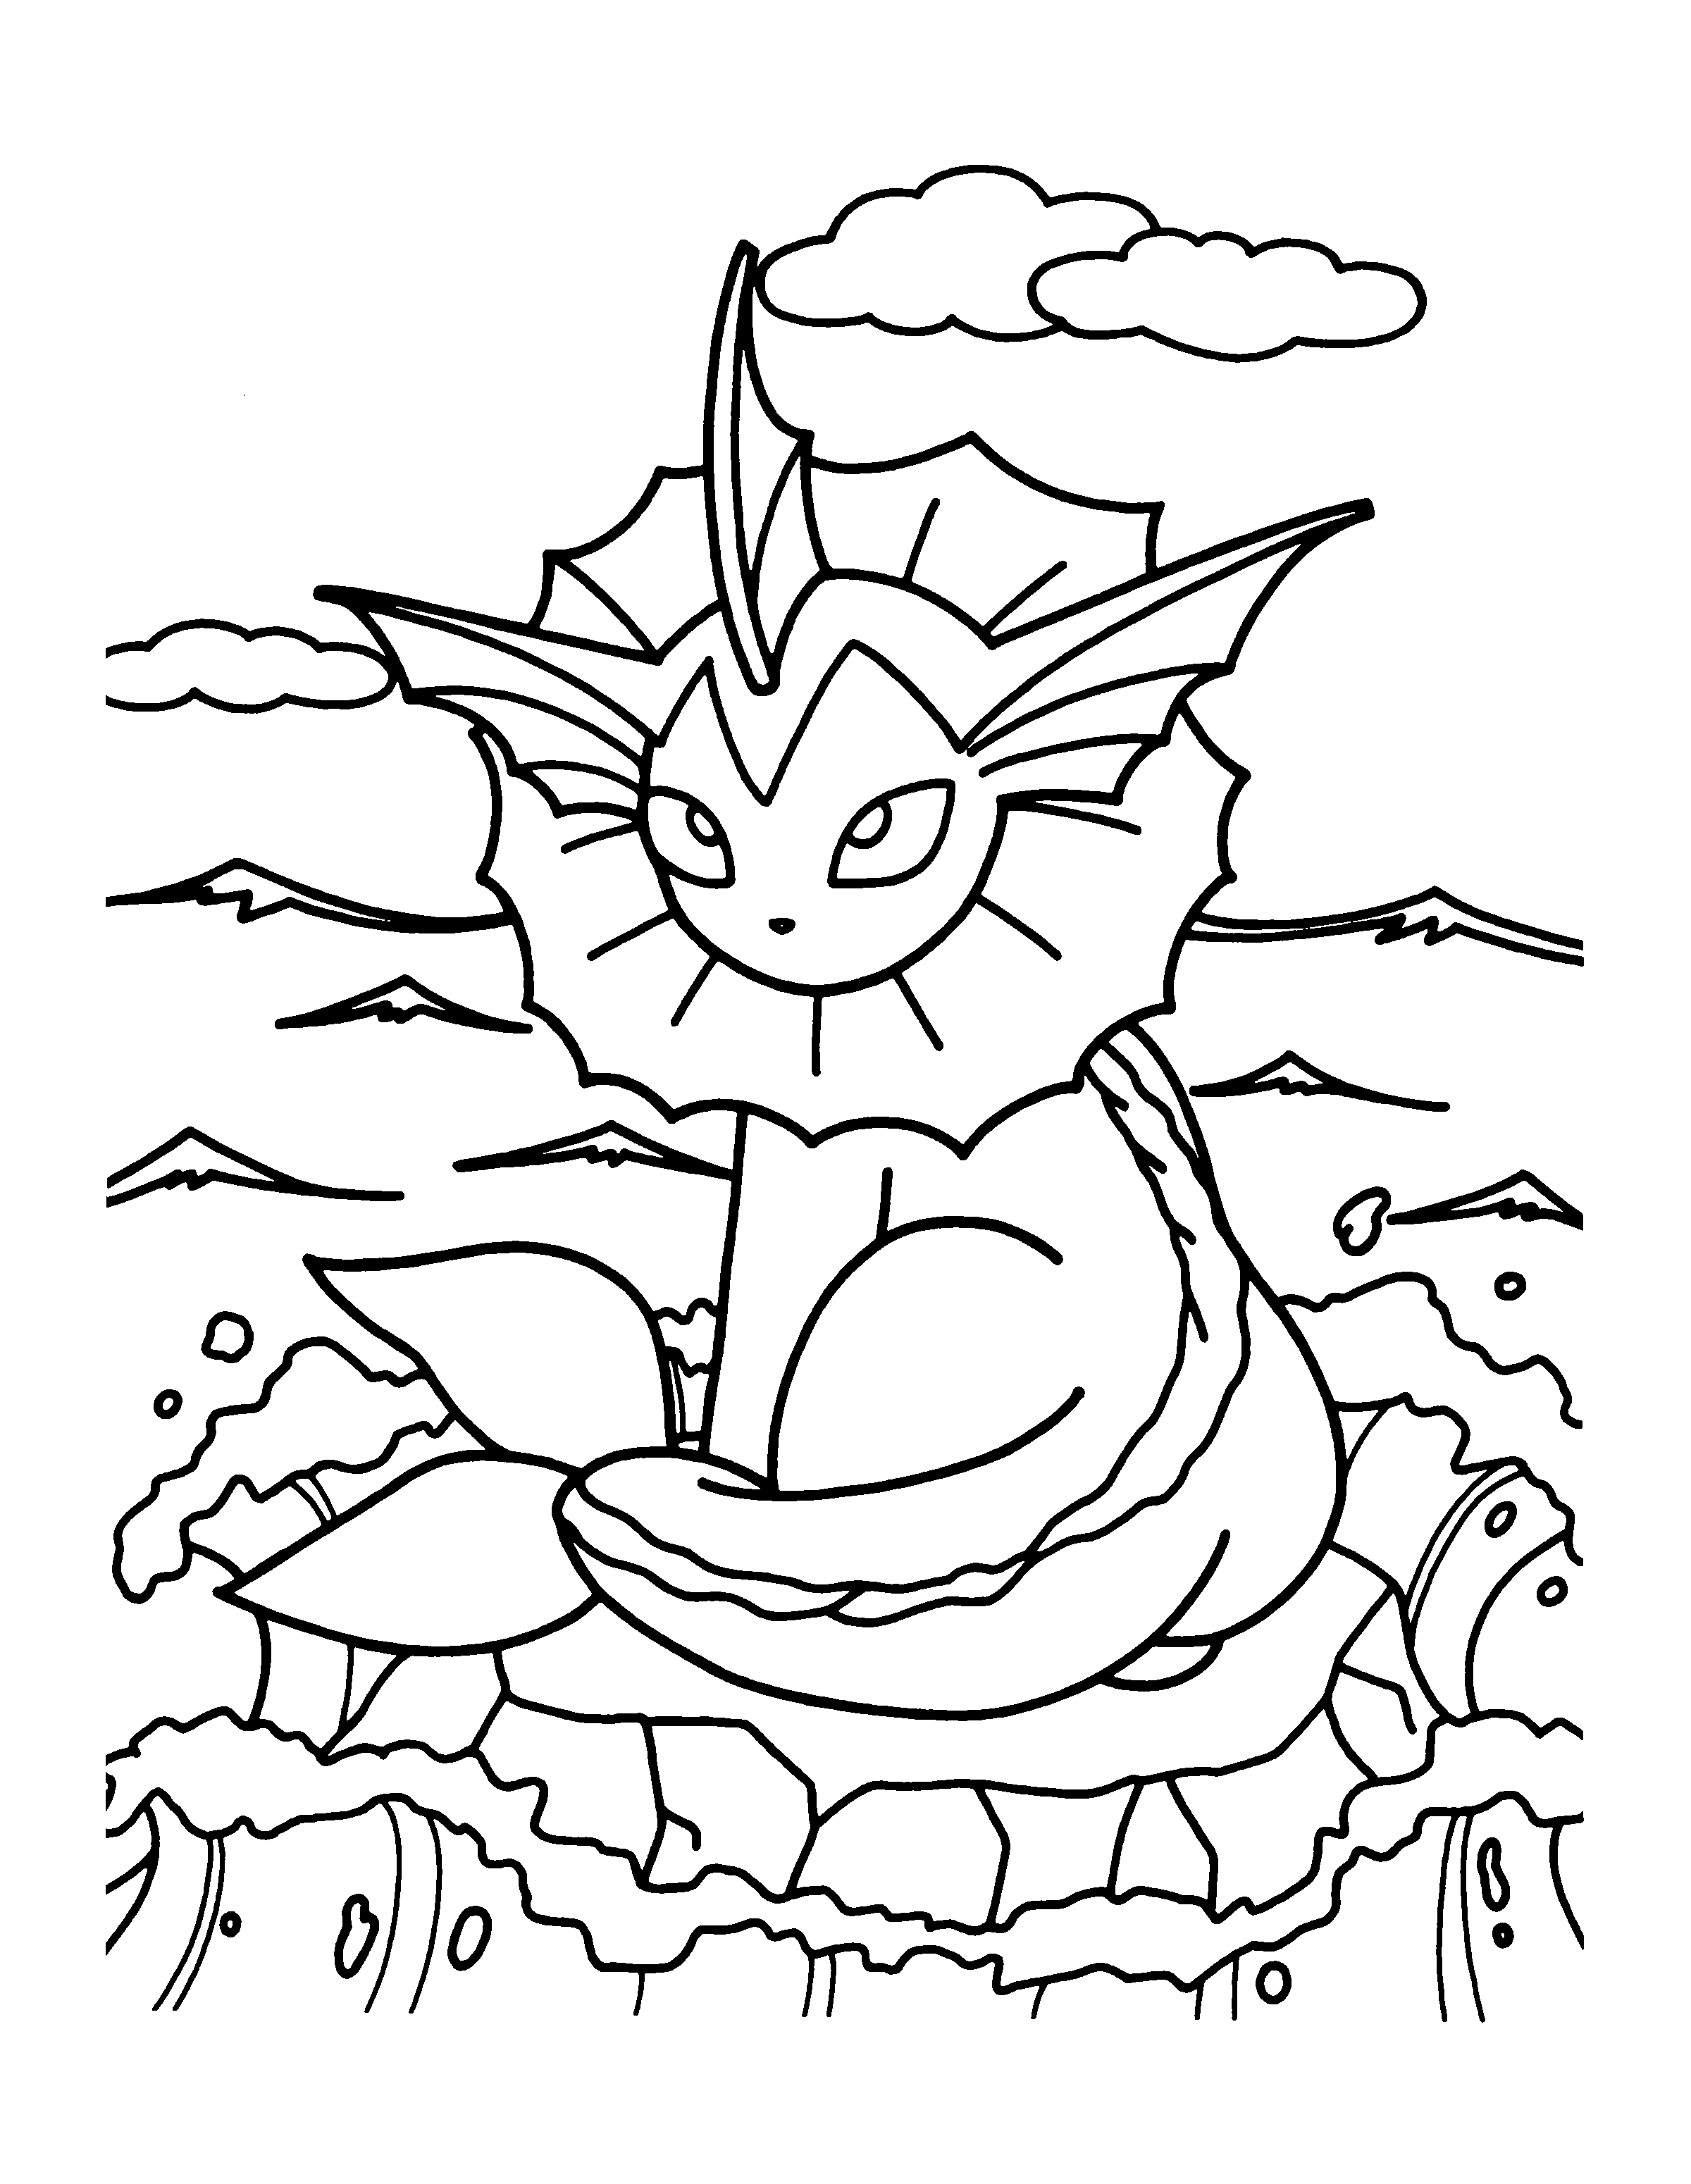 Pokemon Coloring Pages Â» Coloring Pages Kids